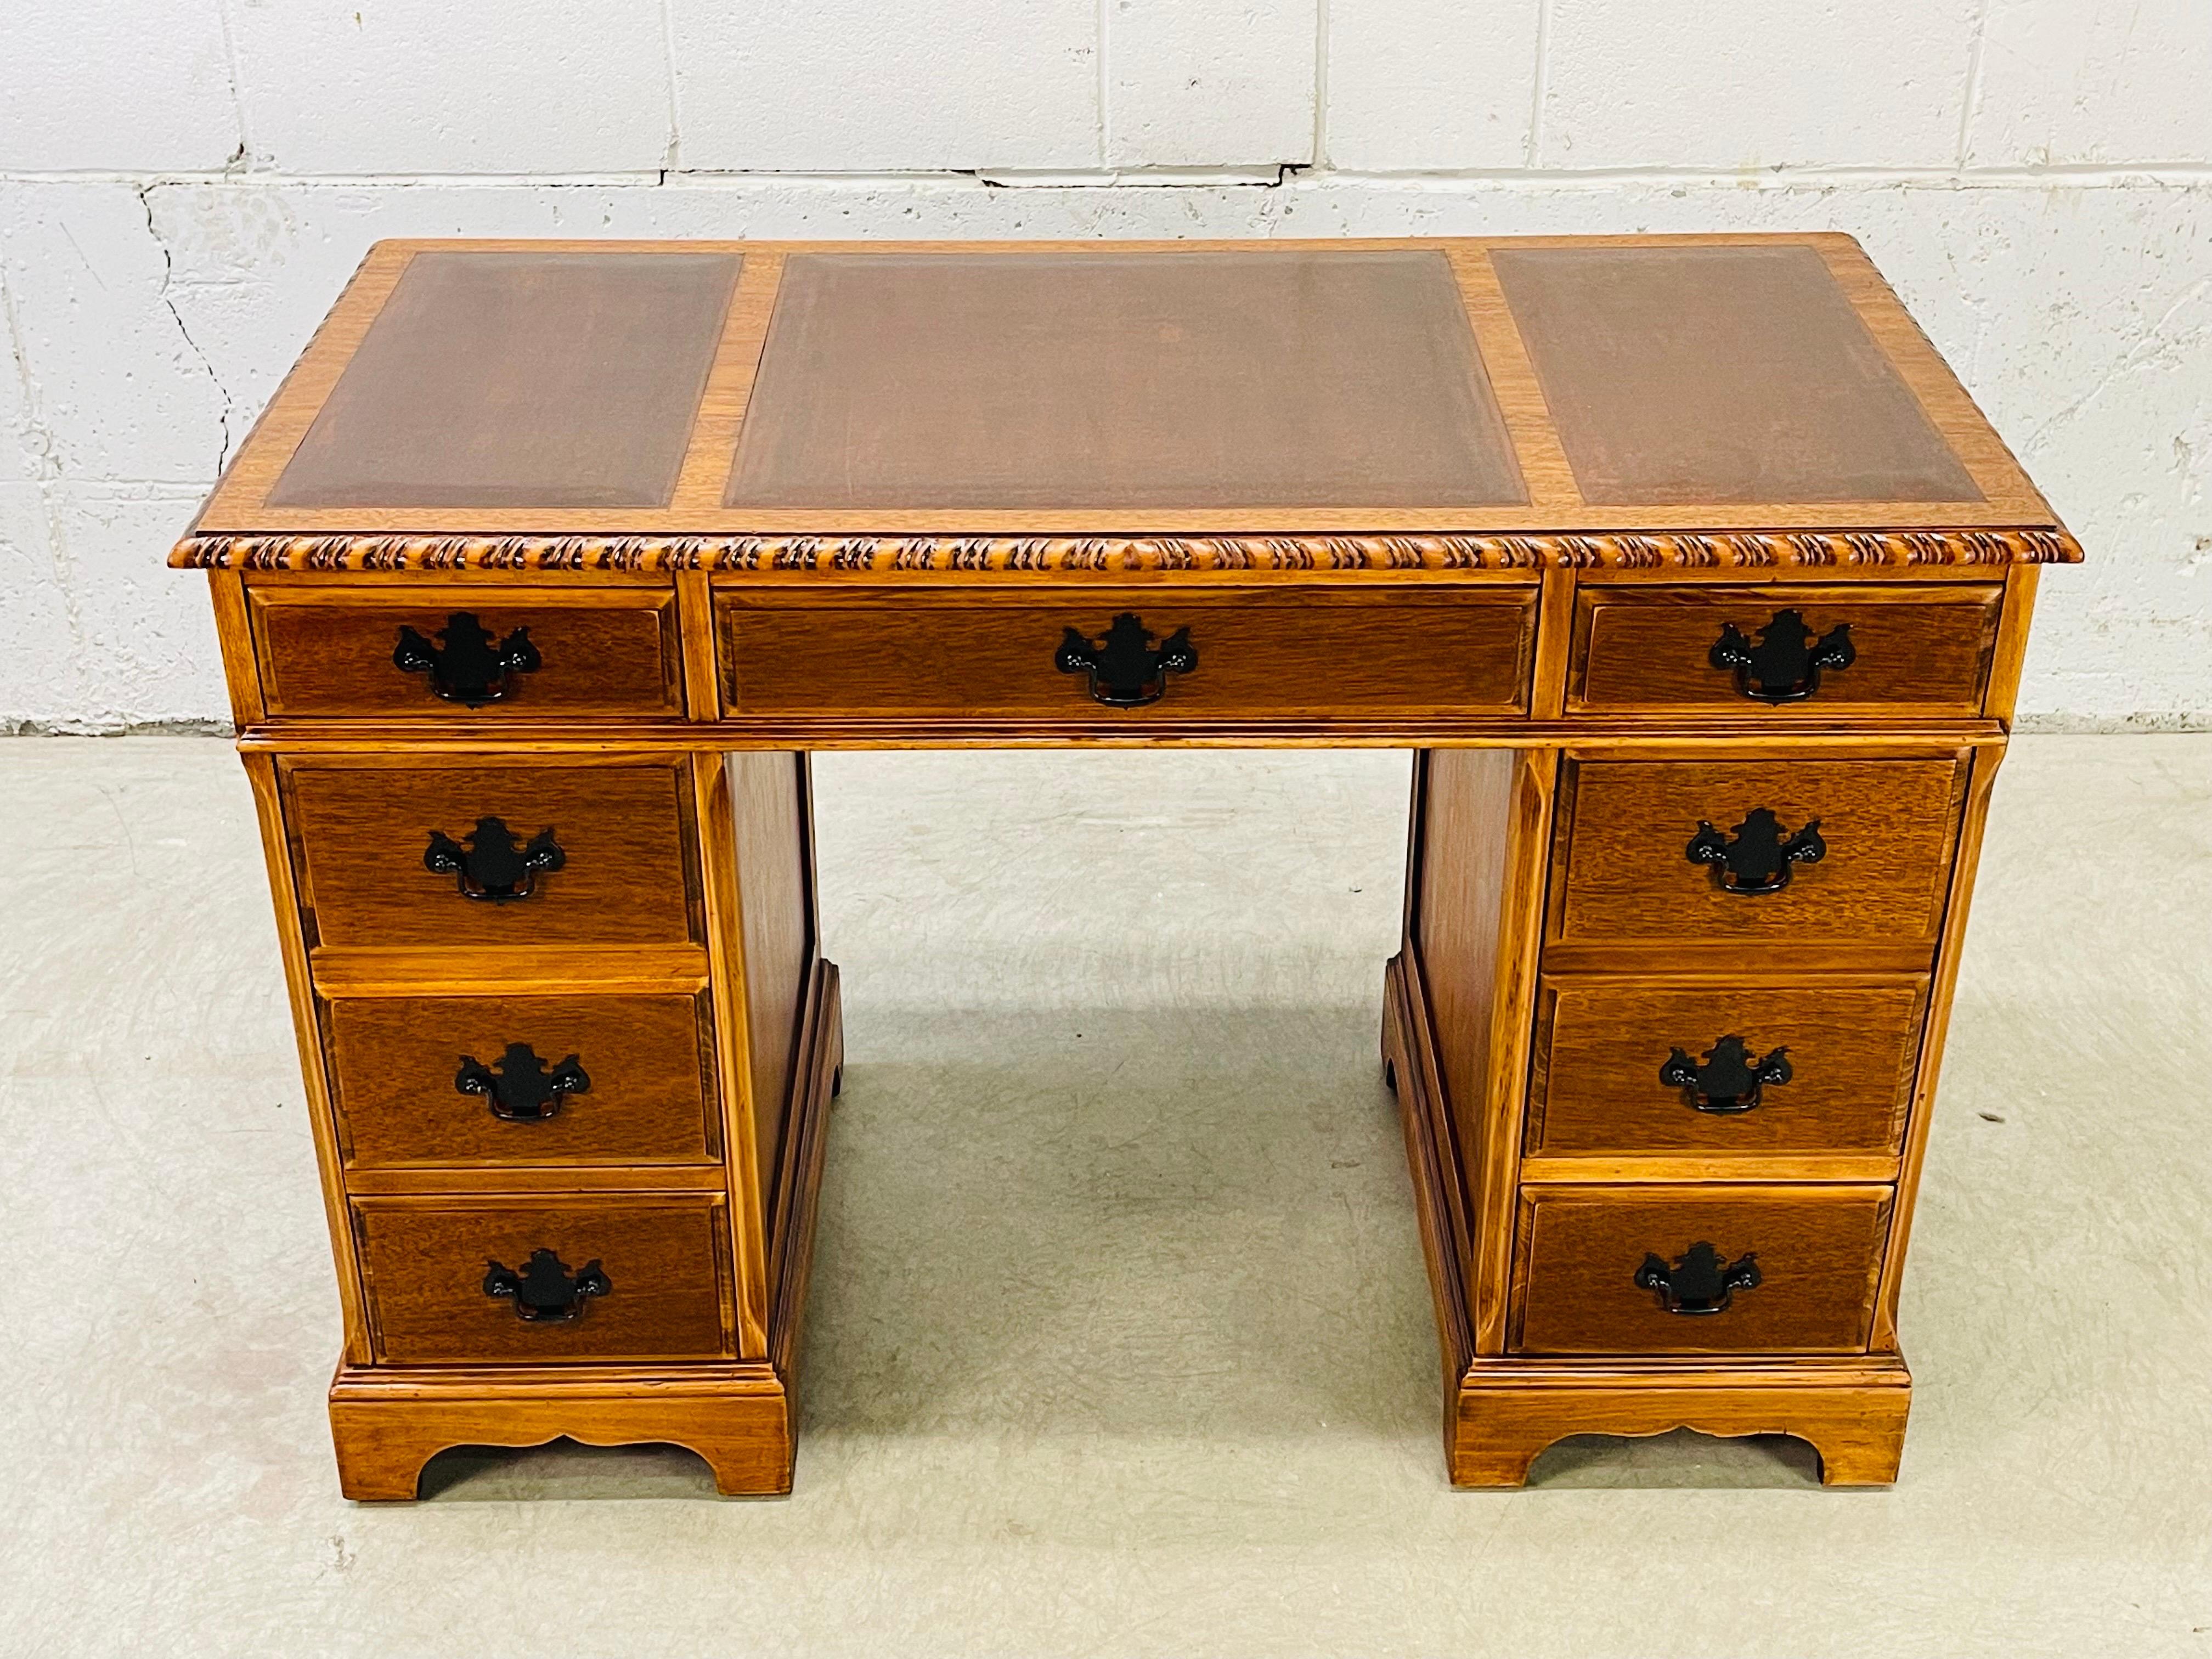 Vintage 1950s mahogany wood and leather top desk. The desk has seven drawers for storage. The knee clearance is 24”H. All the drawers are dovetailed. Leather is in excellent condition. No marks.